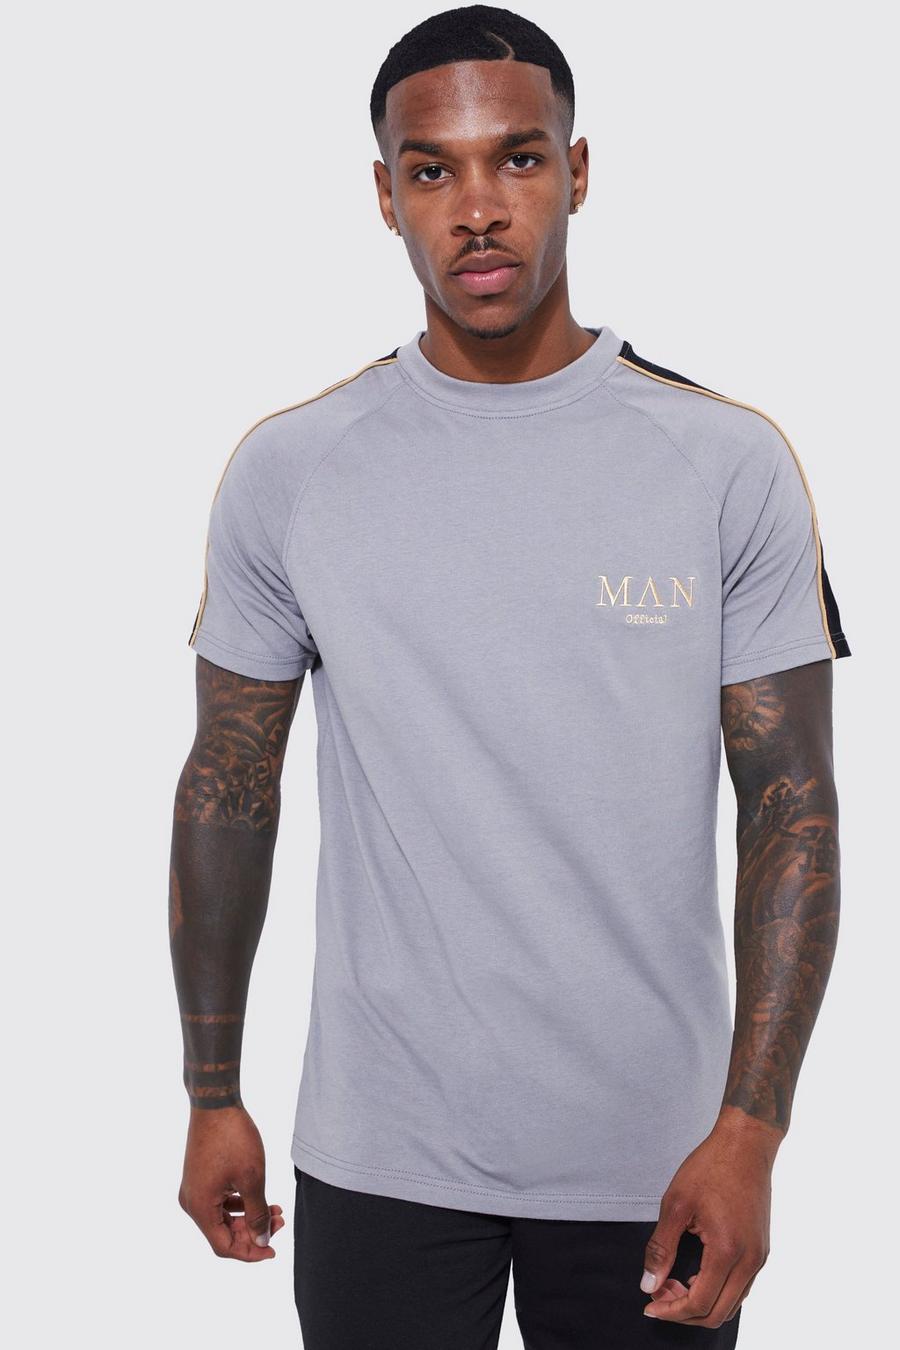 T-shirt Man Gold Slim Fit con cordoncino, Grey image number 1